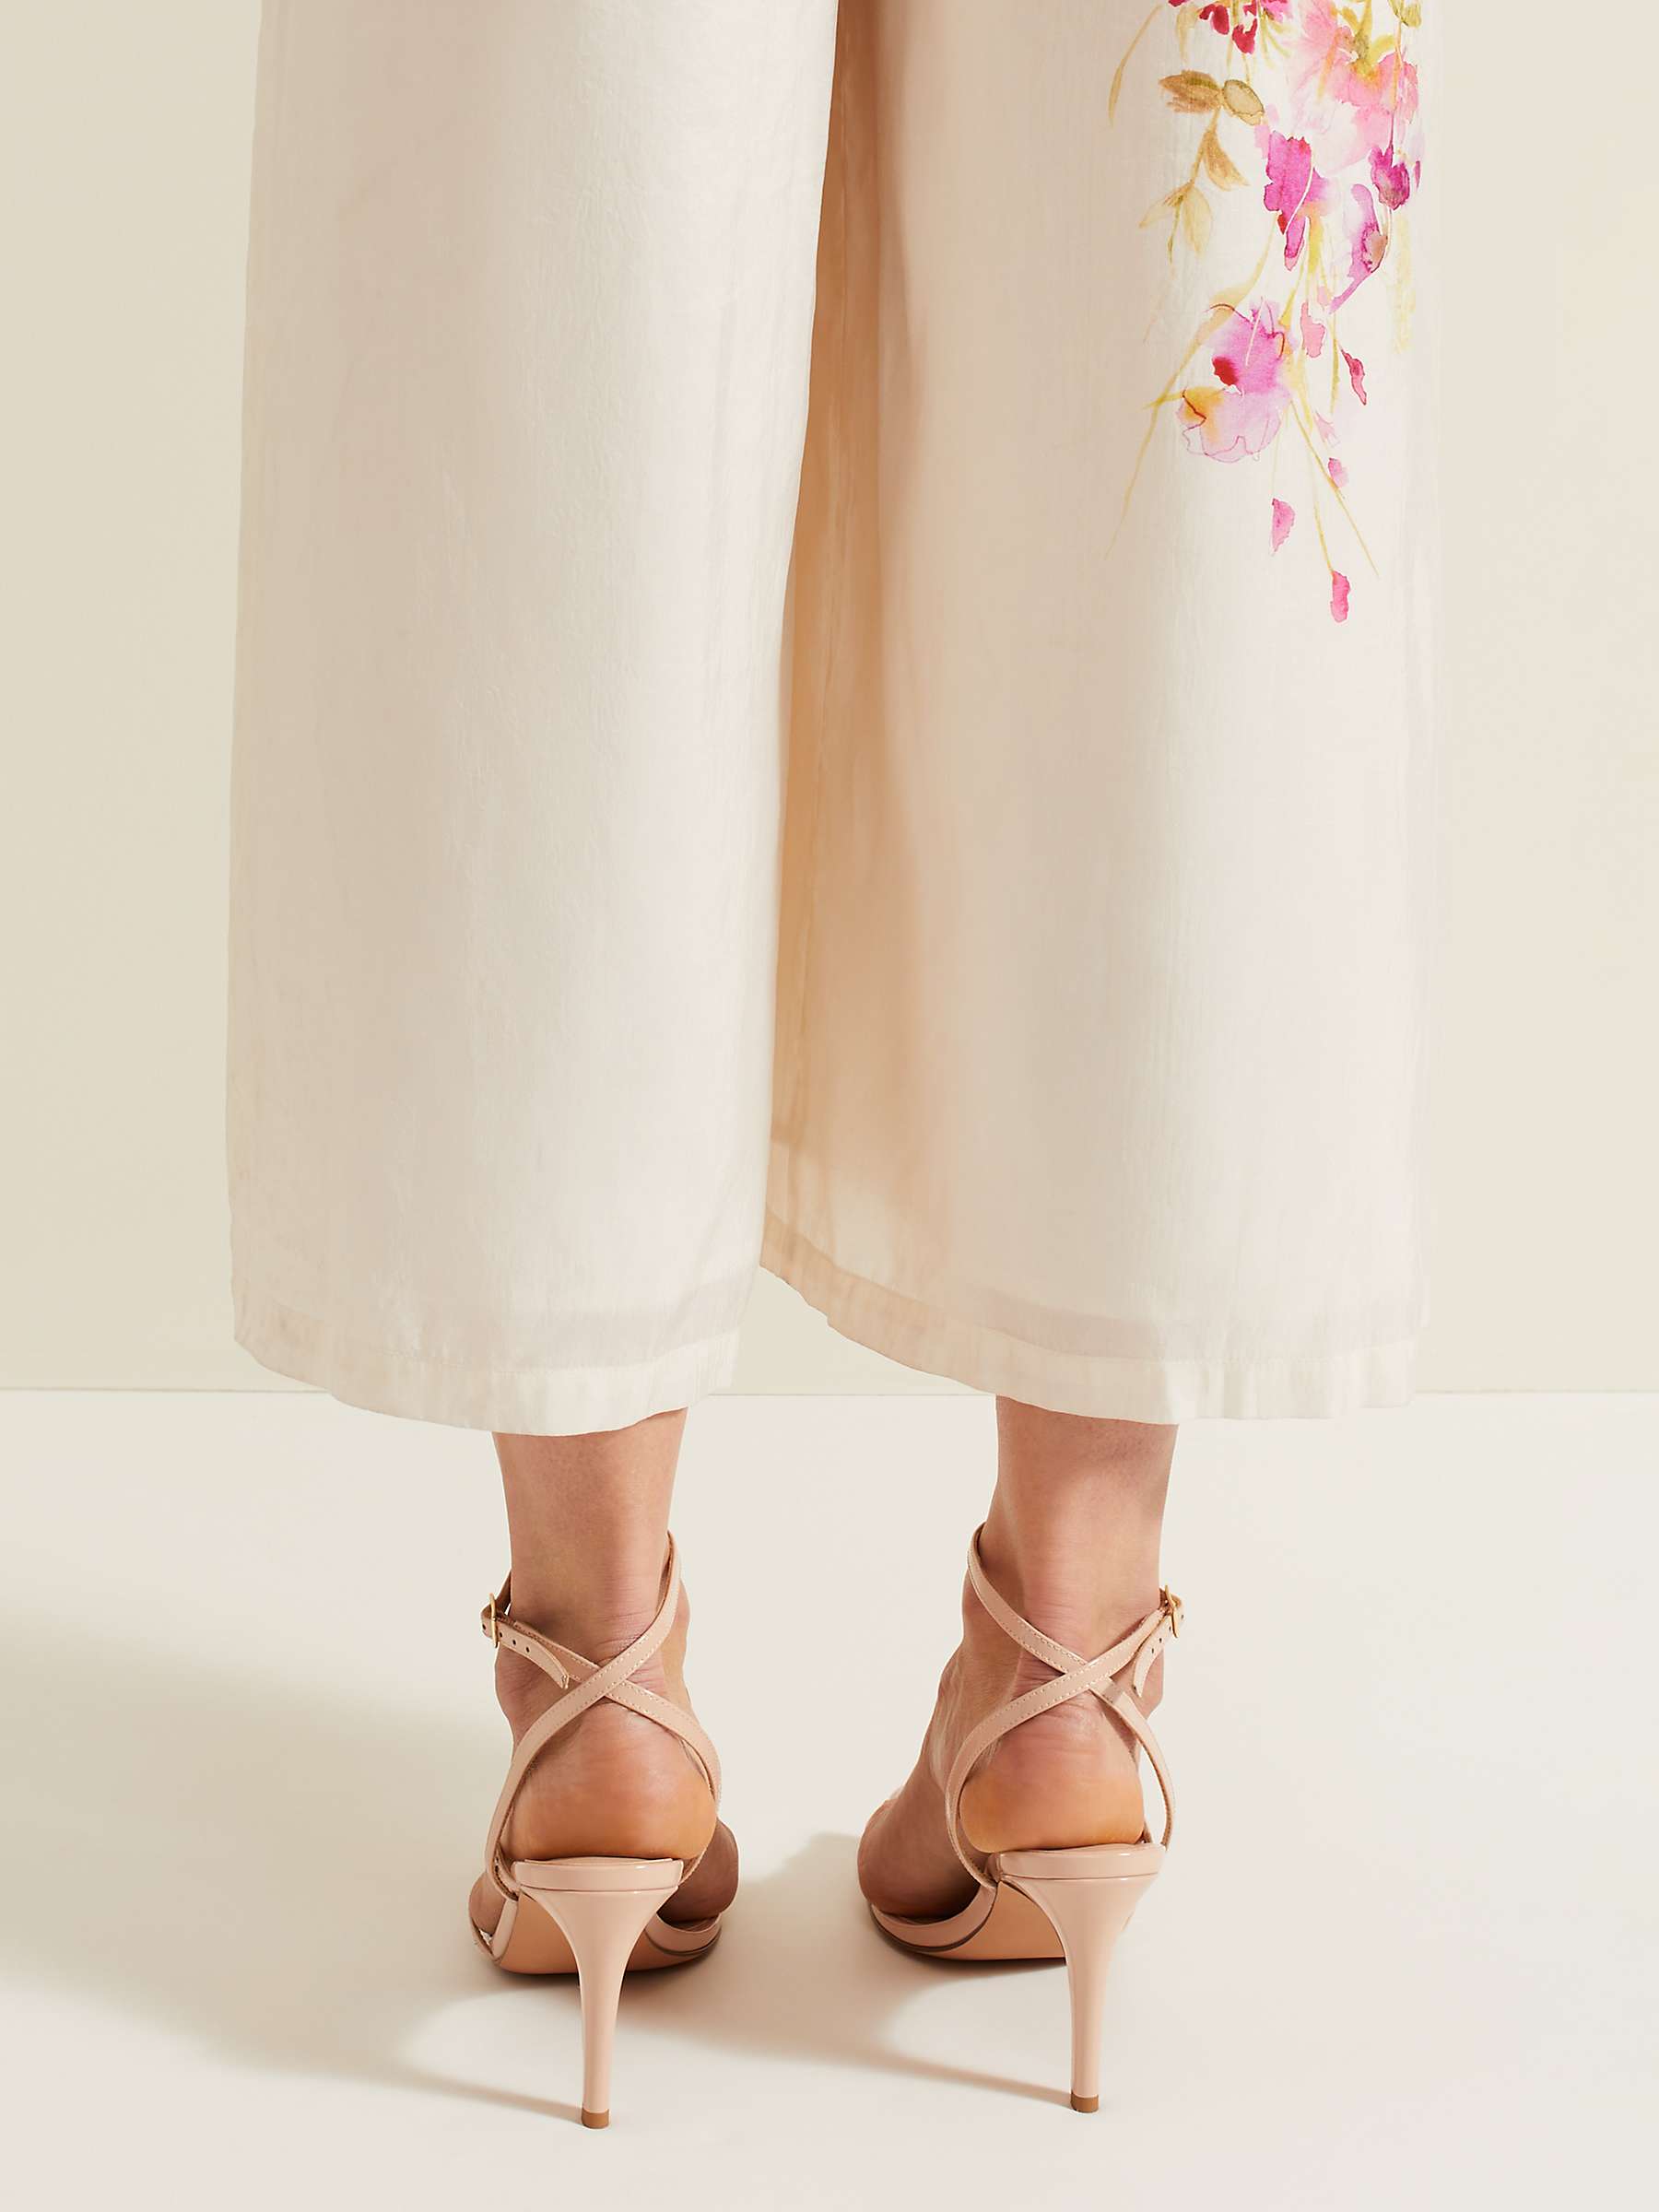 Buy Phase Eight Patent Leather Barely There Strappy Sandals, Pale Pink Online at johnlewis.com